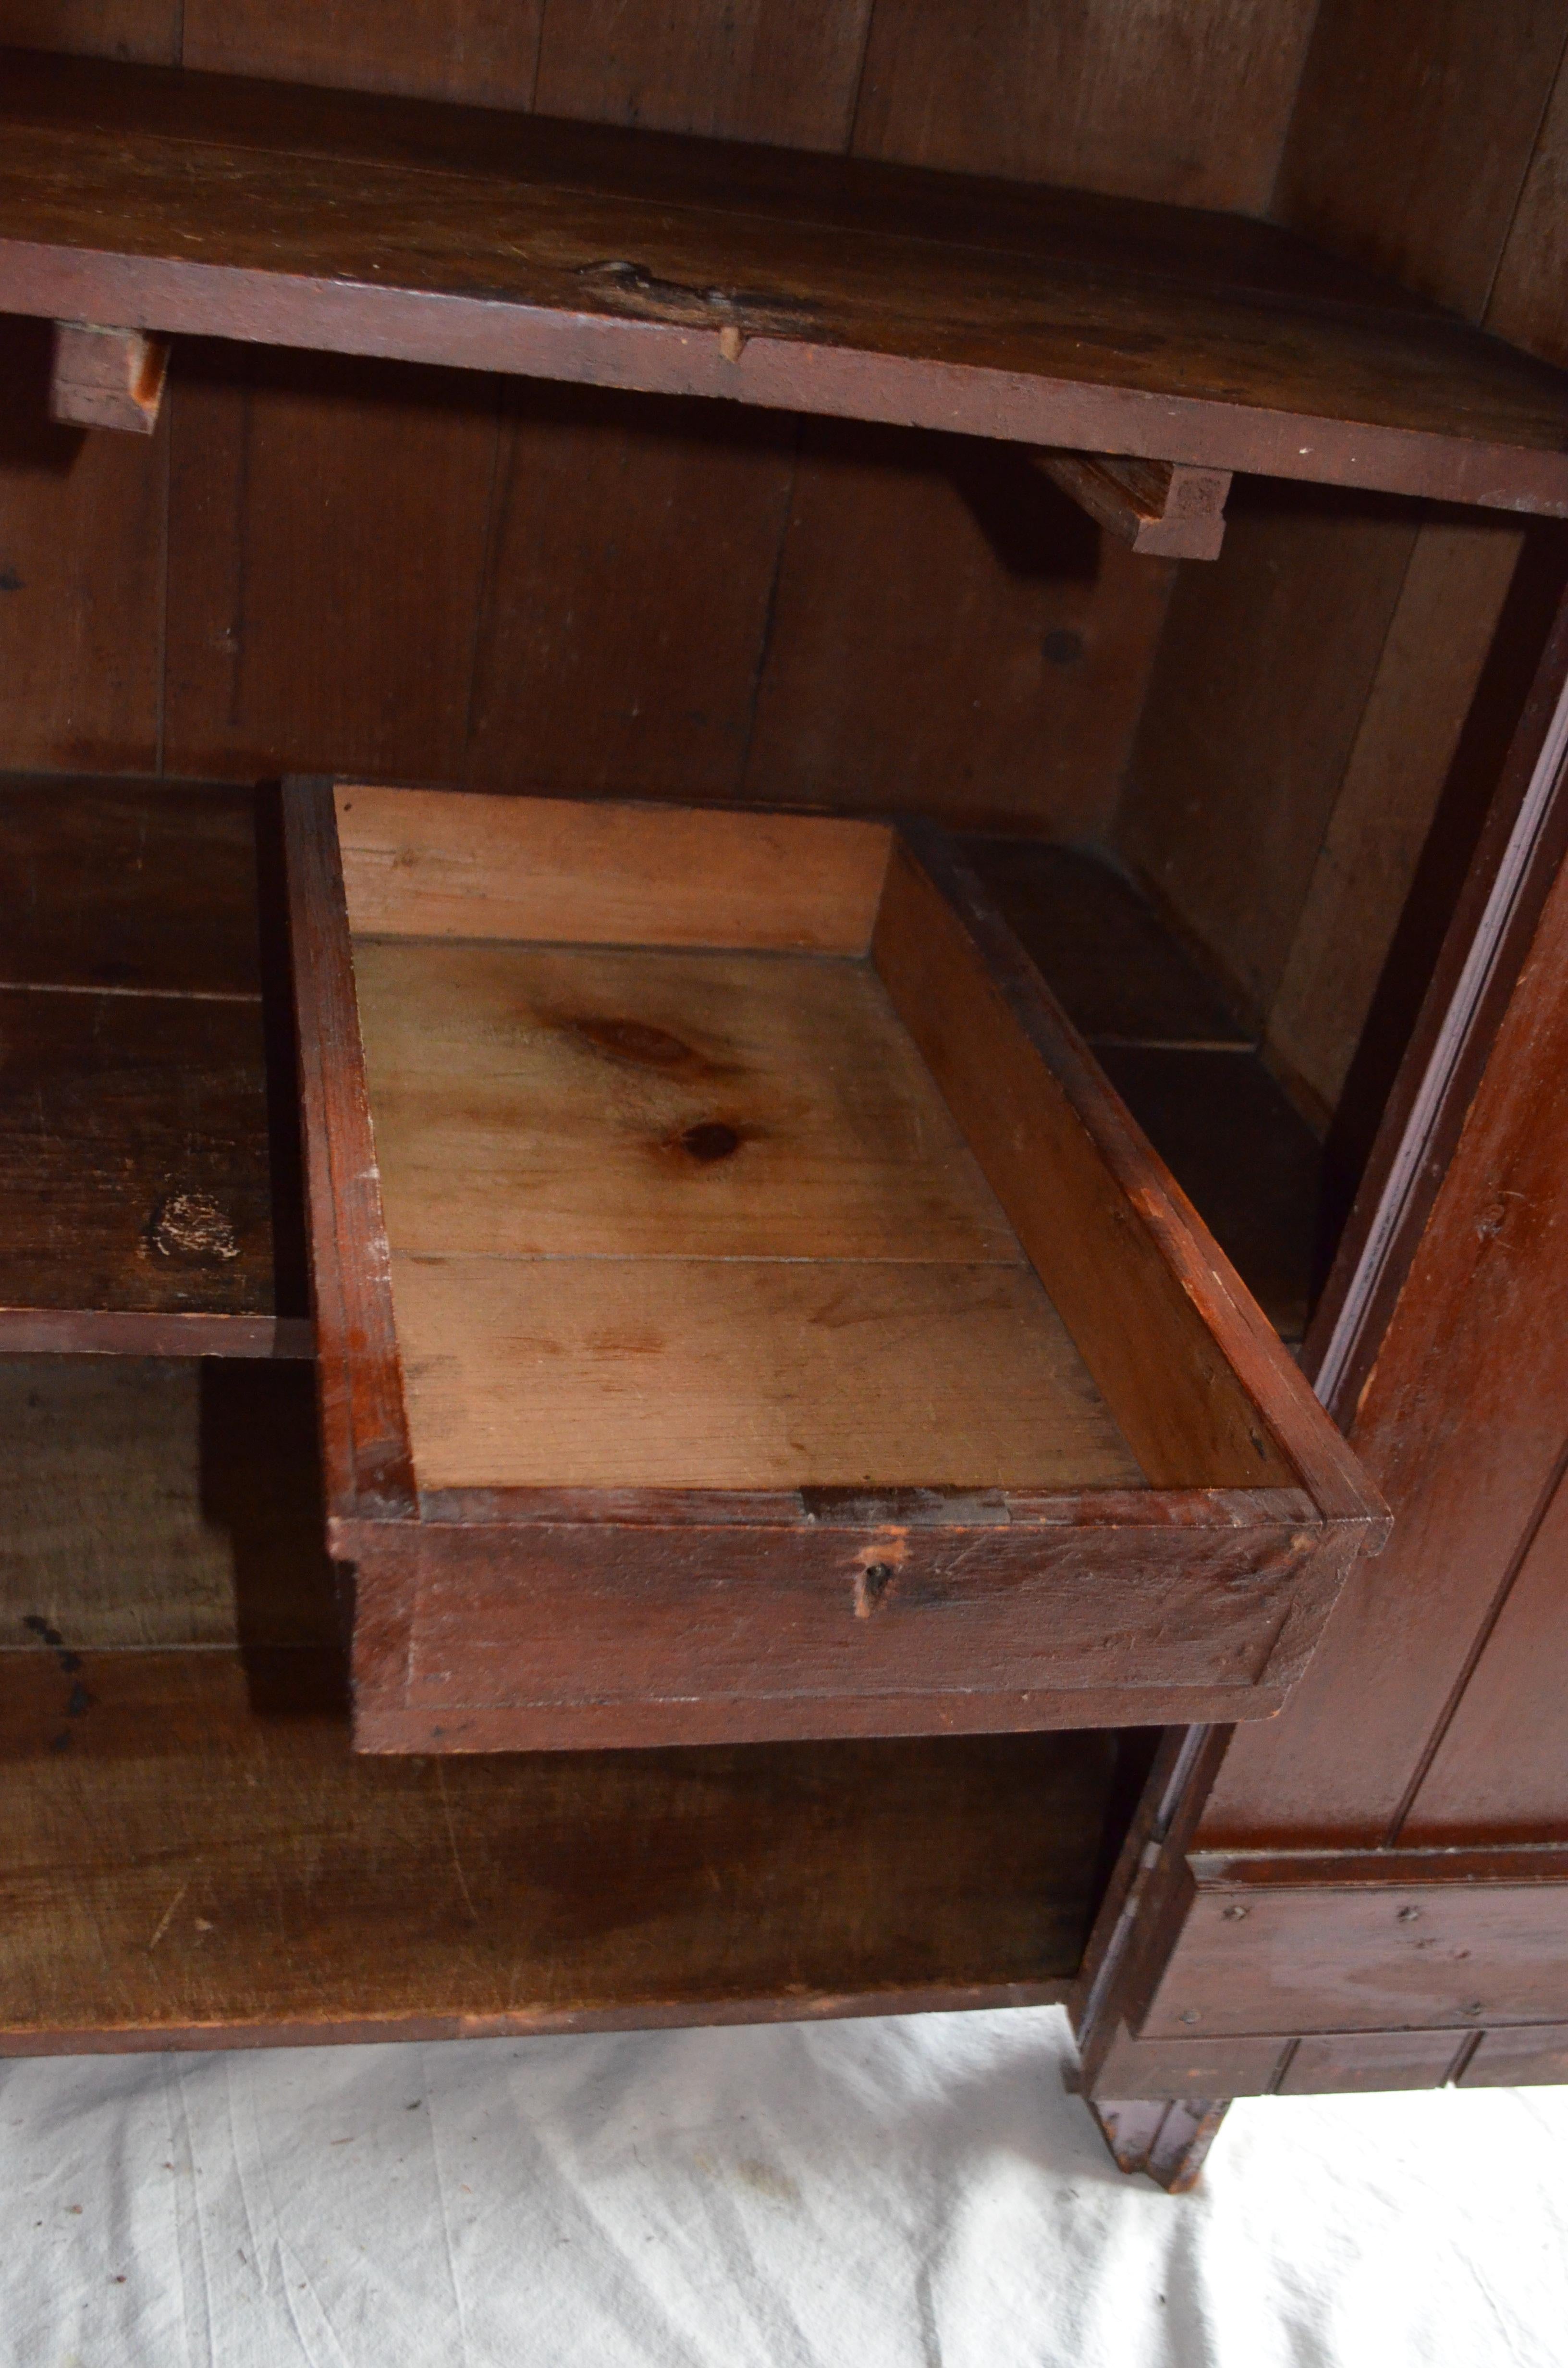 Early 1800s Cupboard for Parlor, Kitchen, Pantry with Lockbox Inside 8